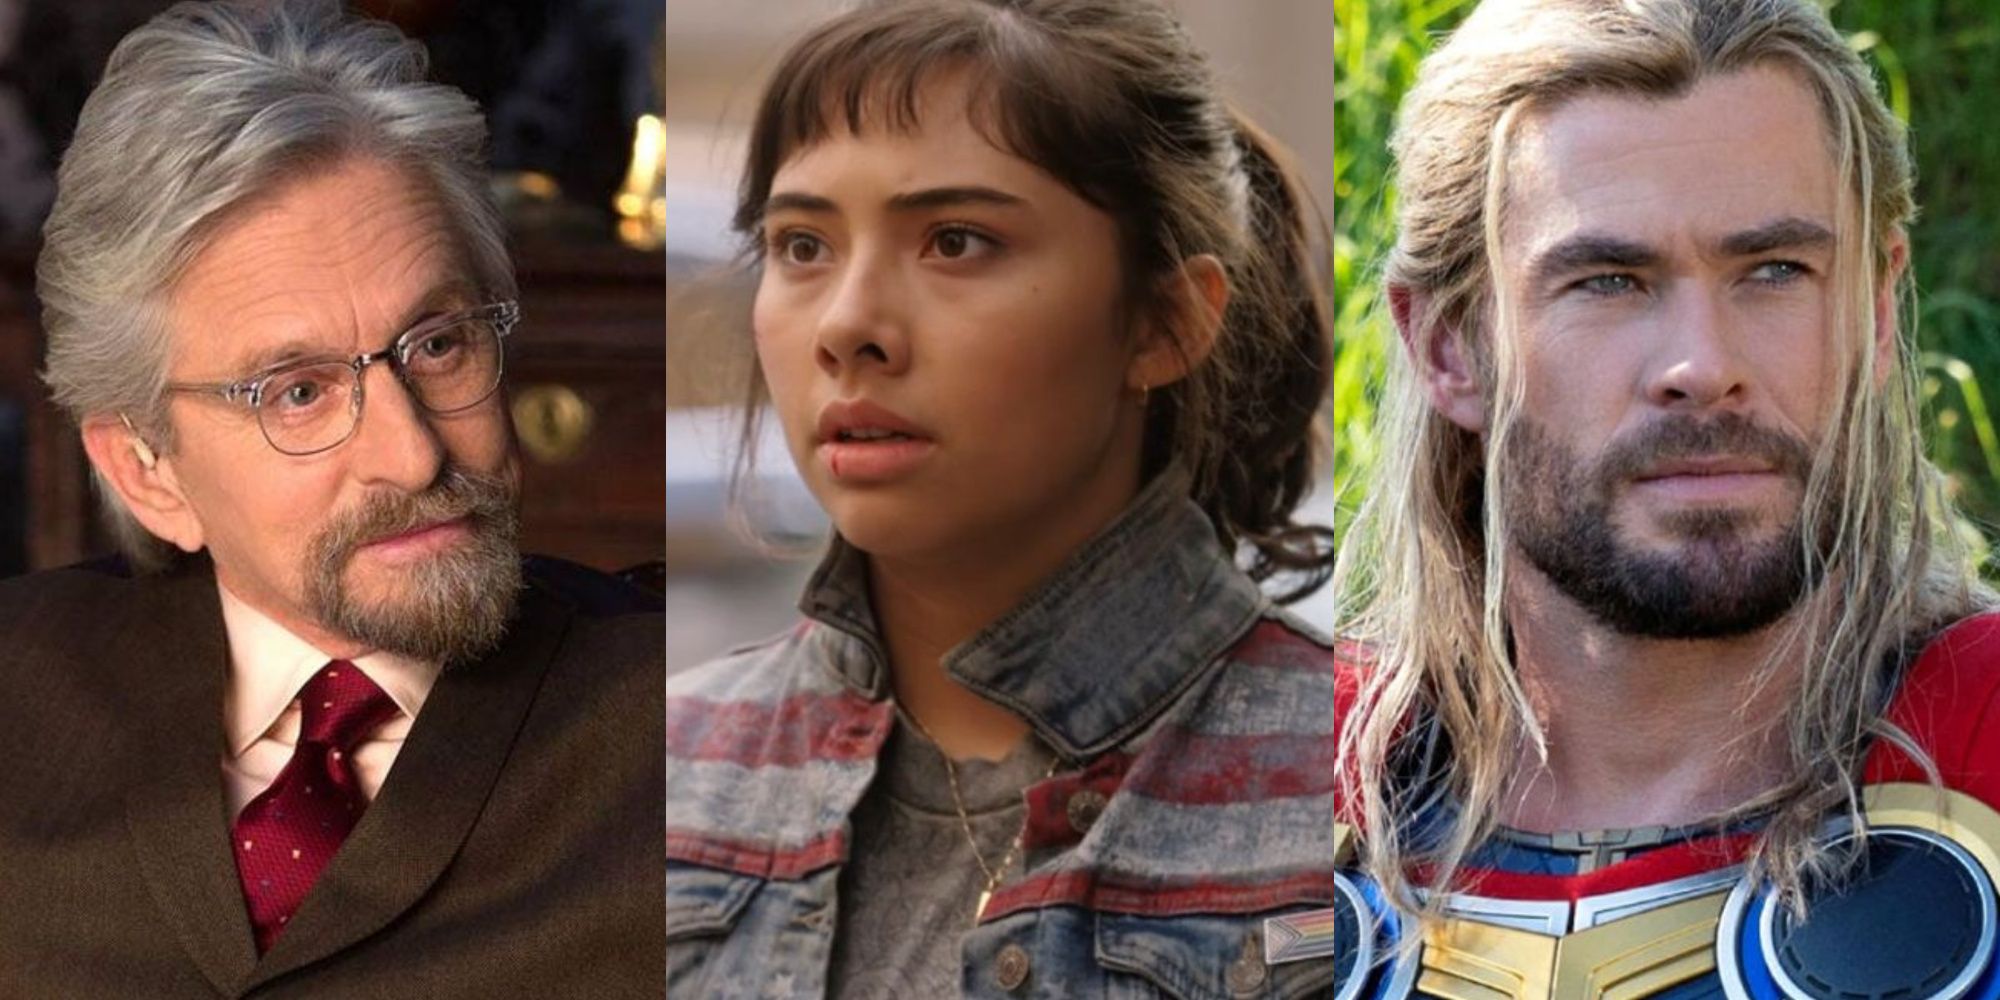 Hank Pym, America Chavez, and Thor in the MCU in a 3-way split image